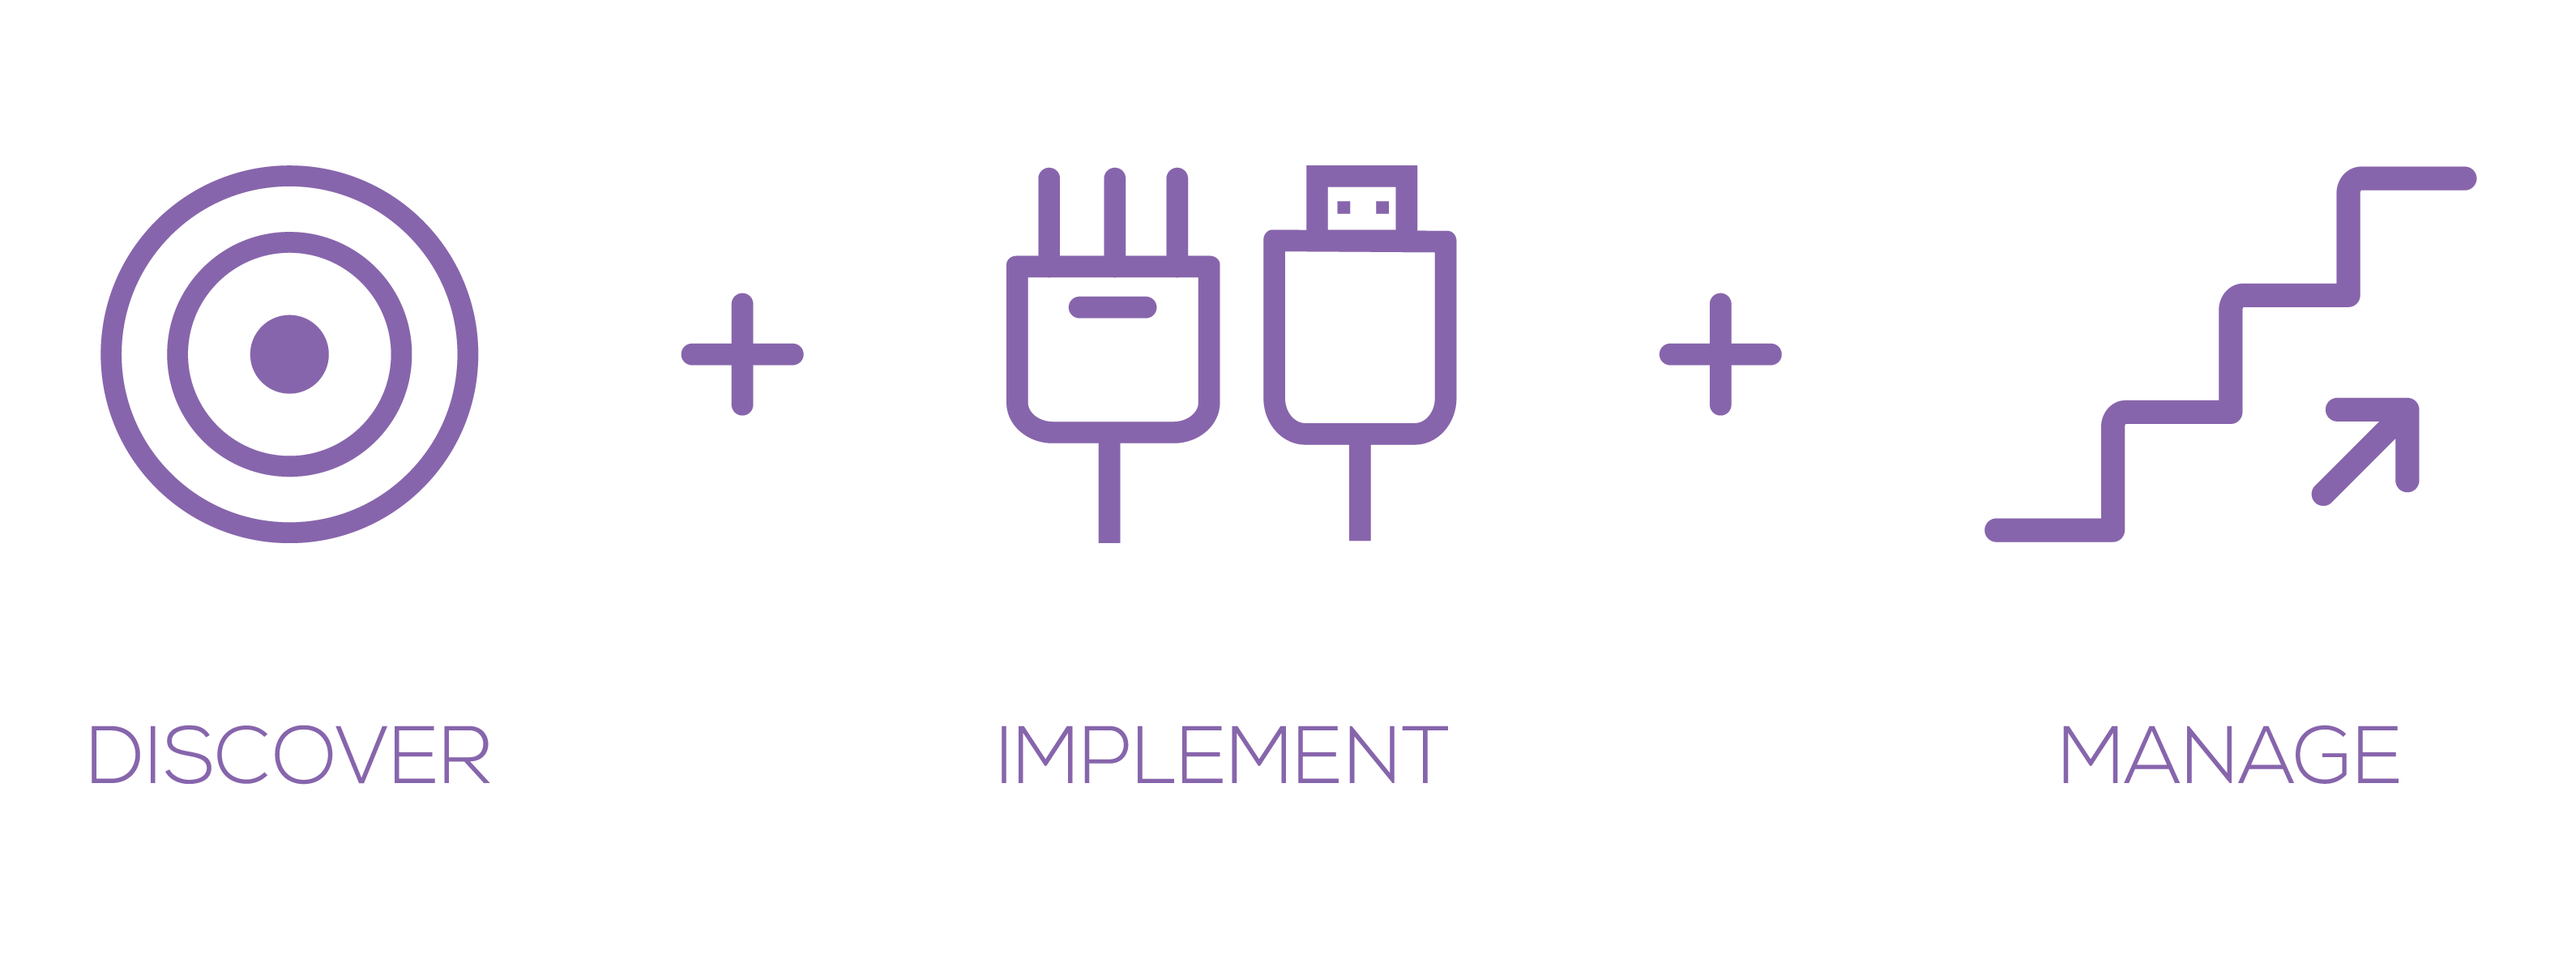 discover implement manage icon